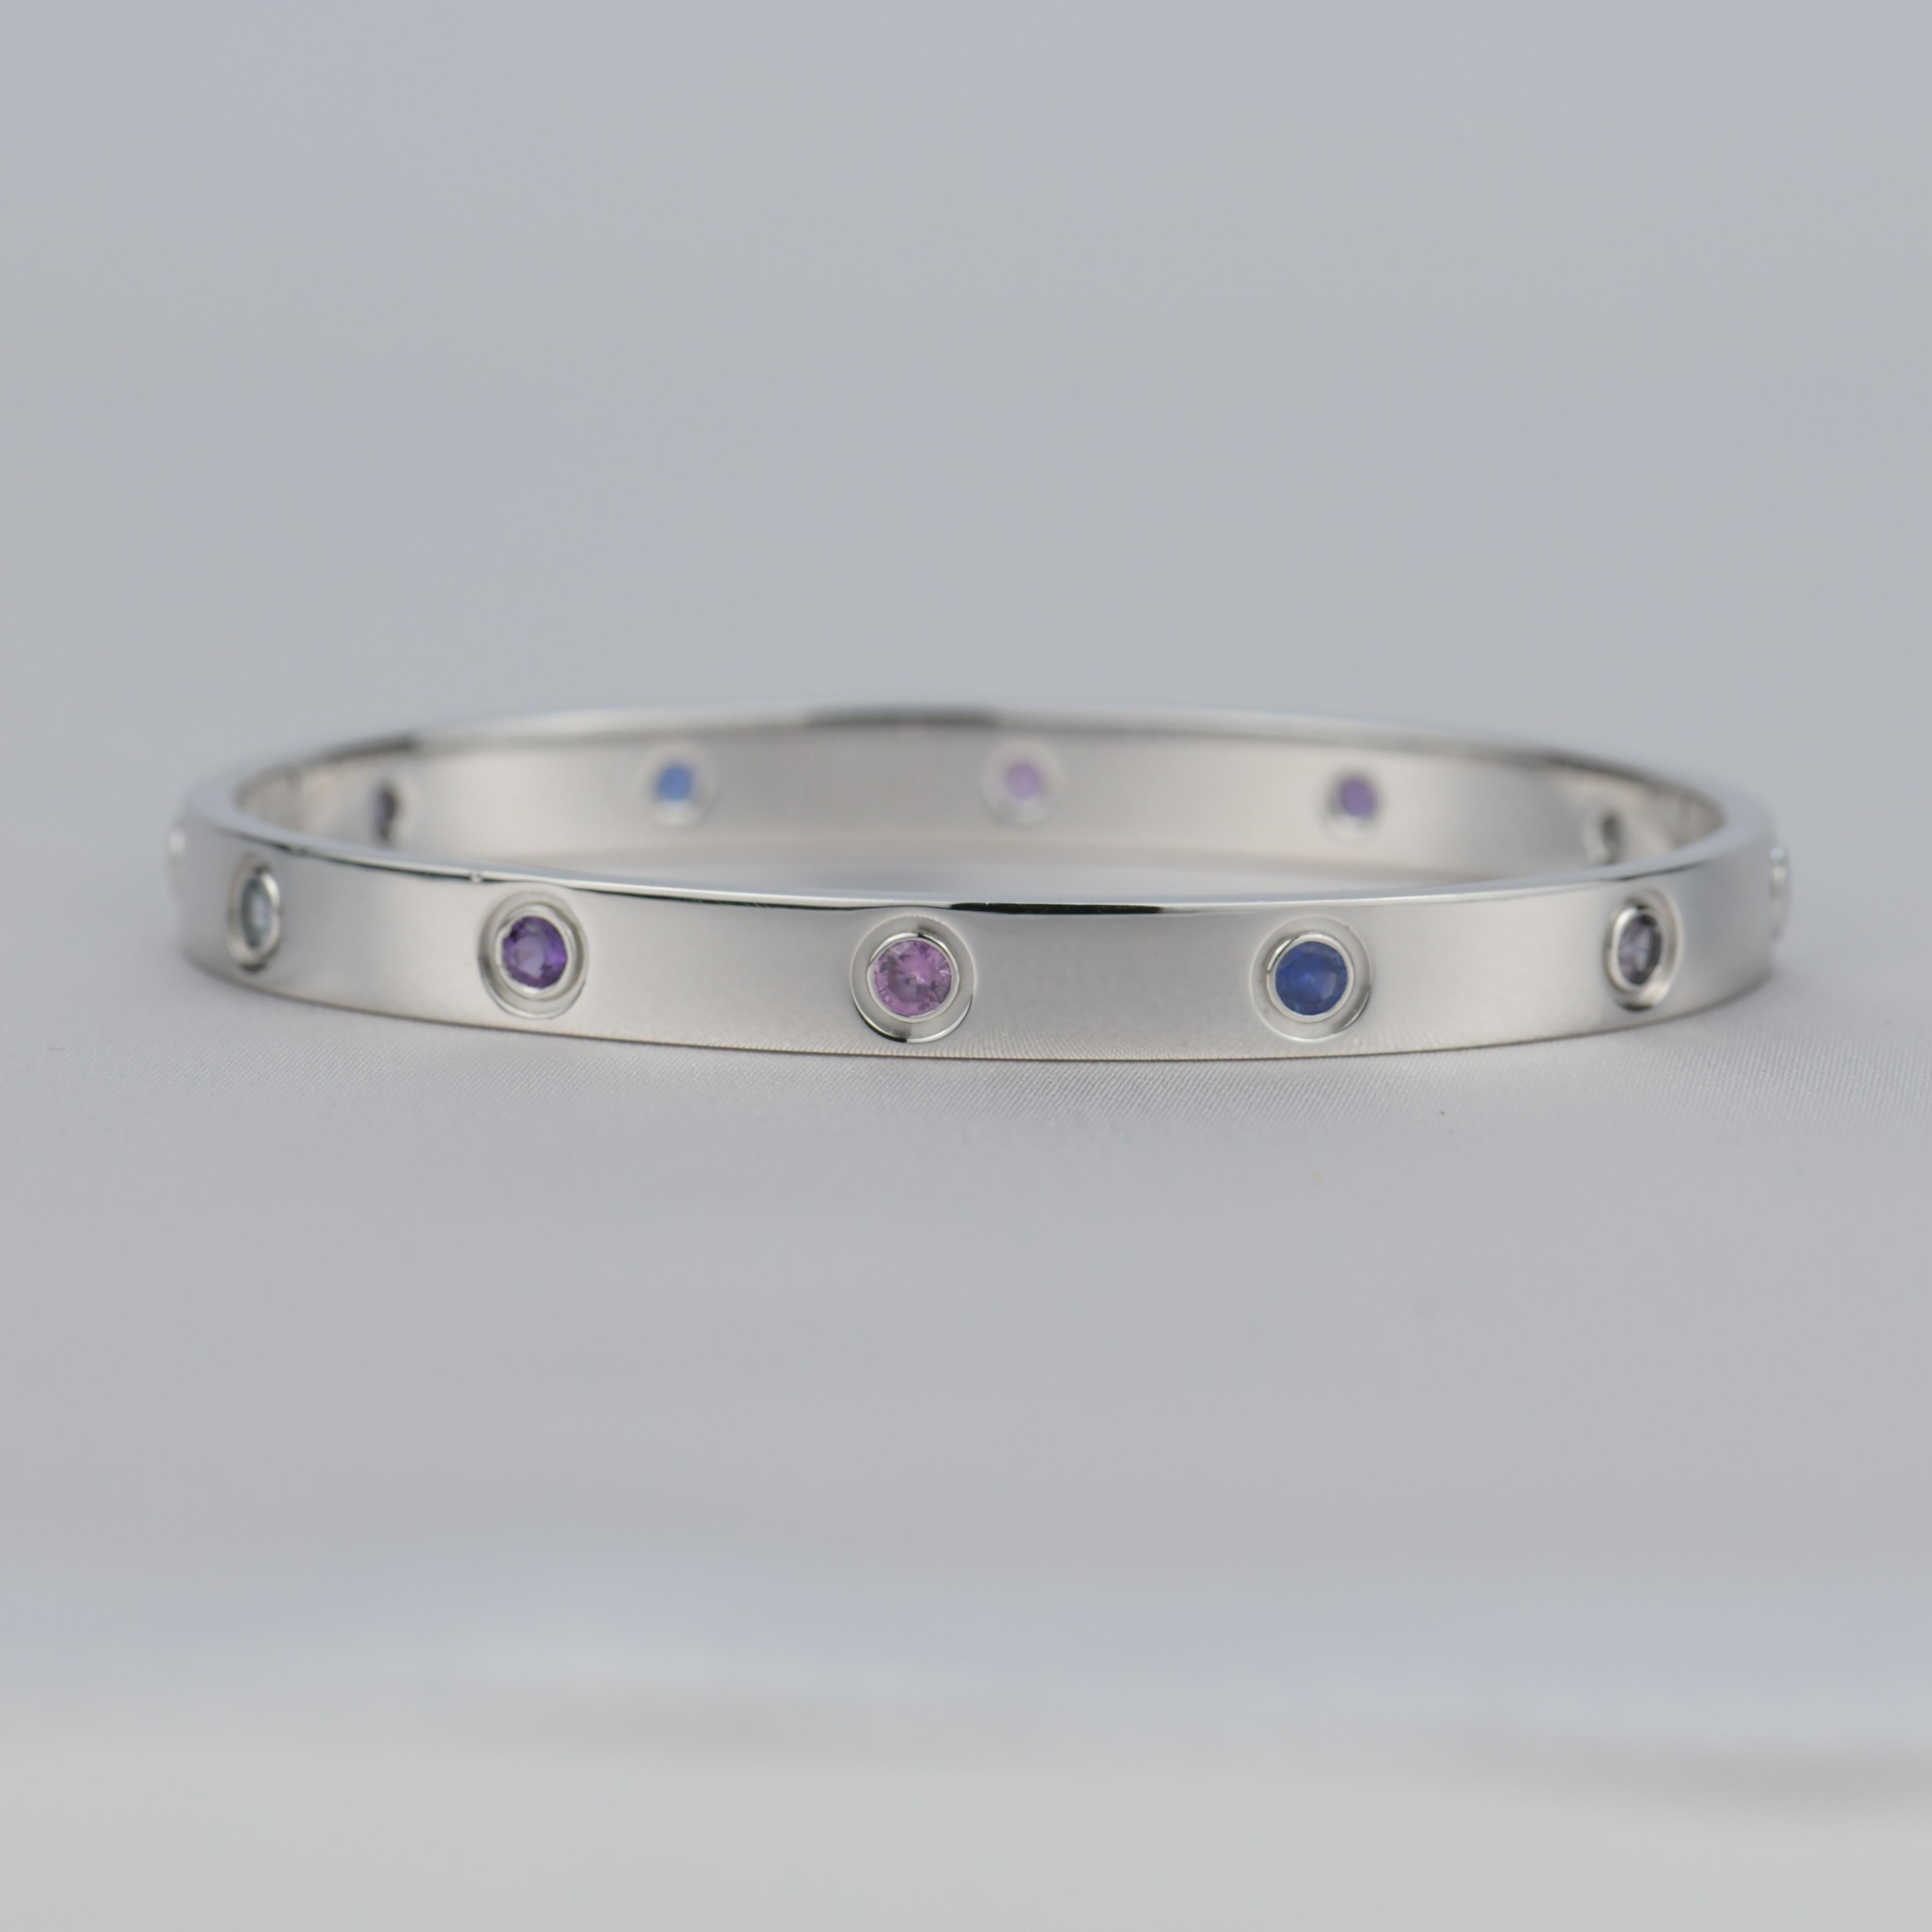 LOVE bracelet, 18K white gold, set with 2 aquamarines, 2 pink sapphires, 2 blue sapphires, 2 purple spinels, and 2 amethysts. Size 17

__________________________________

Dandelion Antiques Code AT-0778
Brand Cartier
Model B6036317
Date 2013
Retail